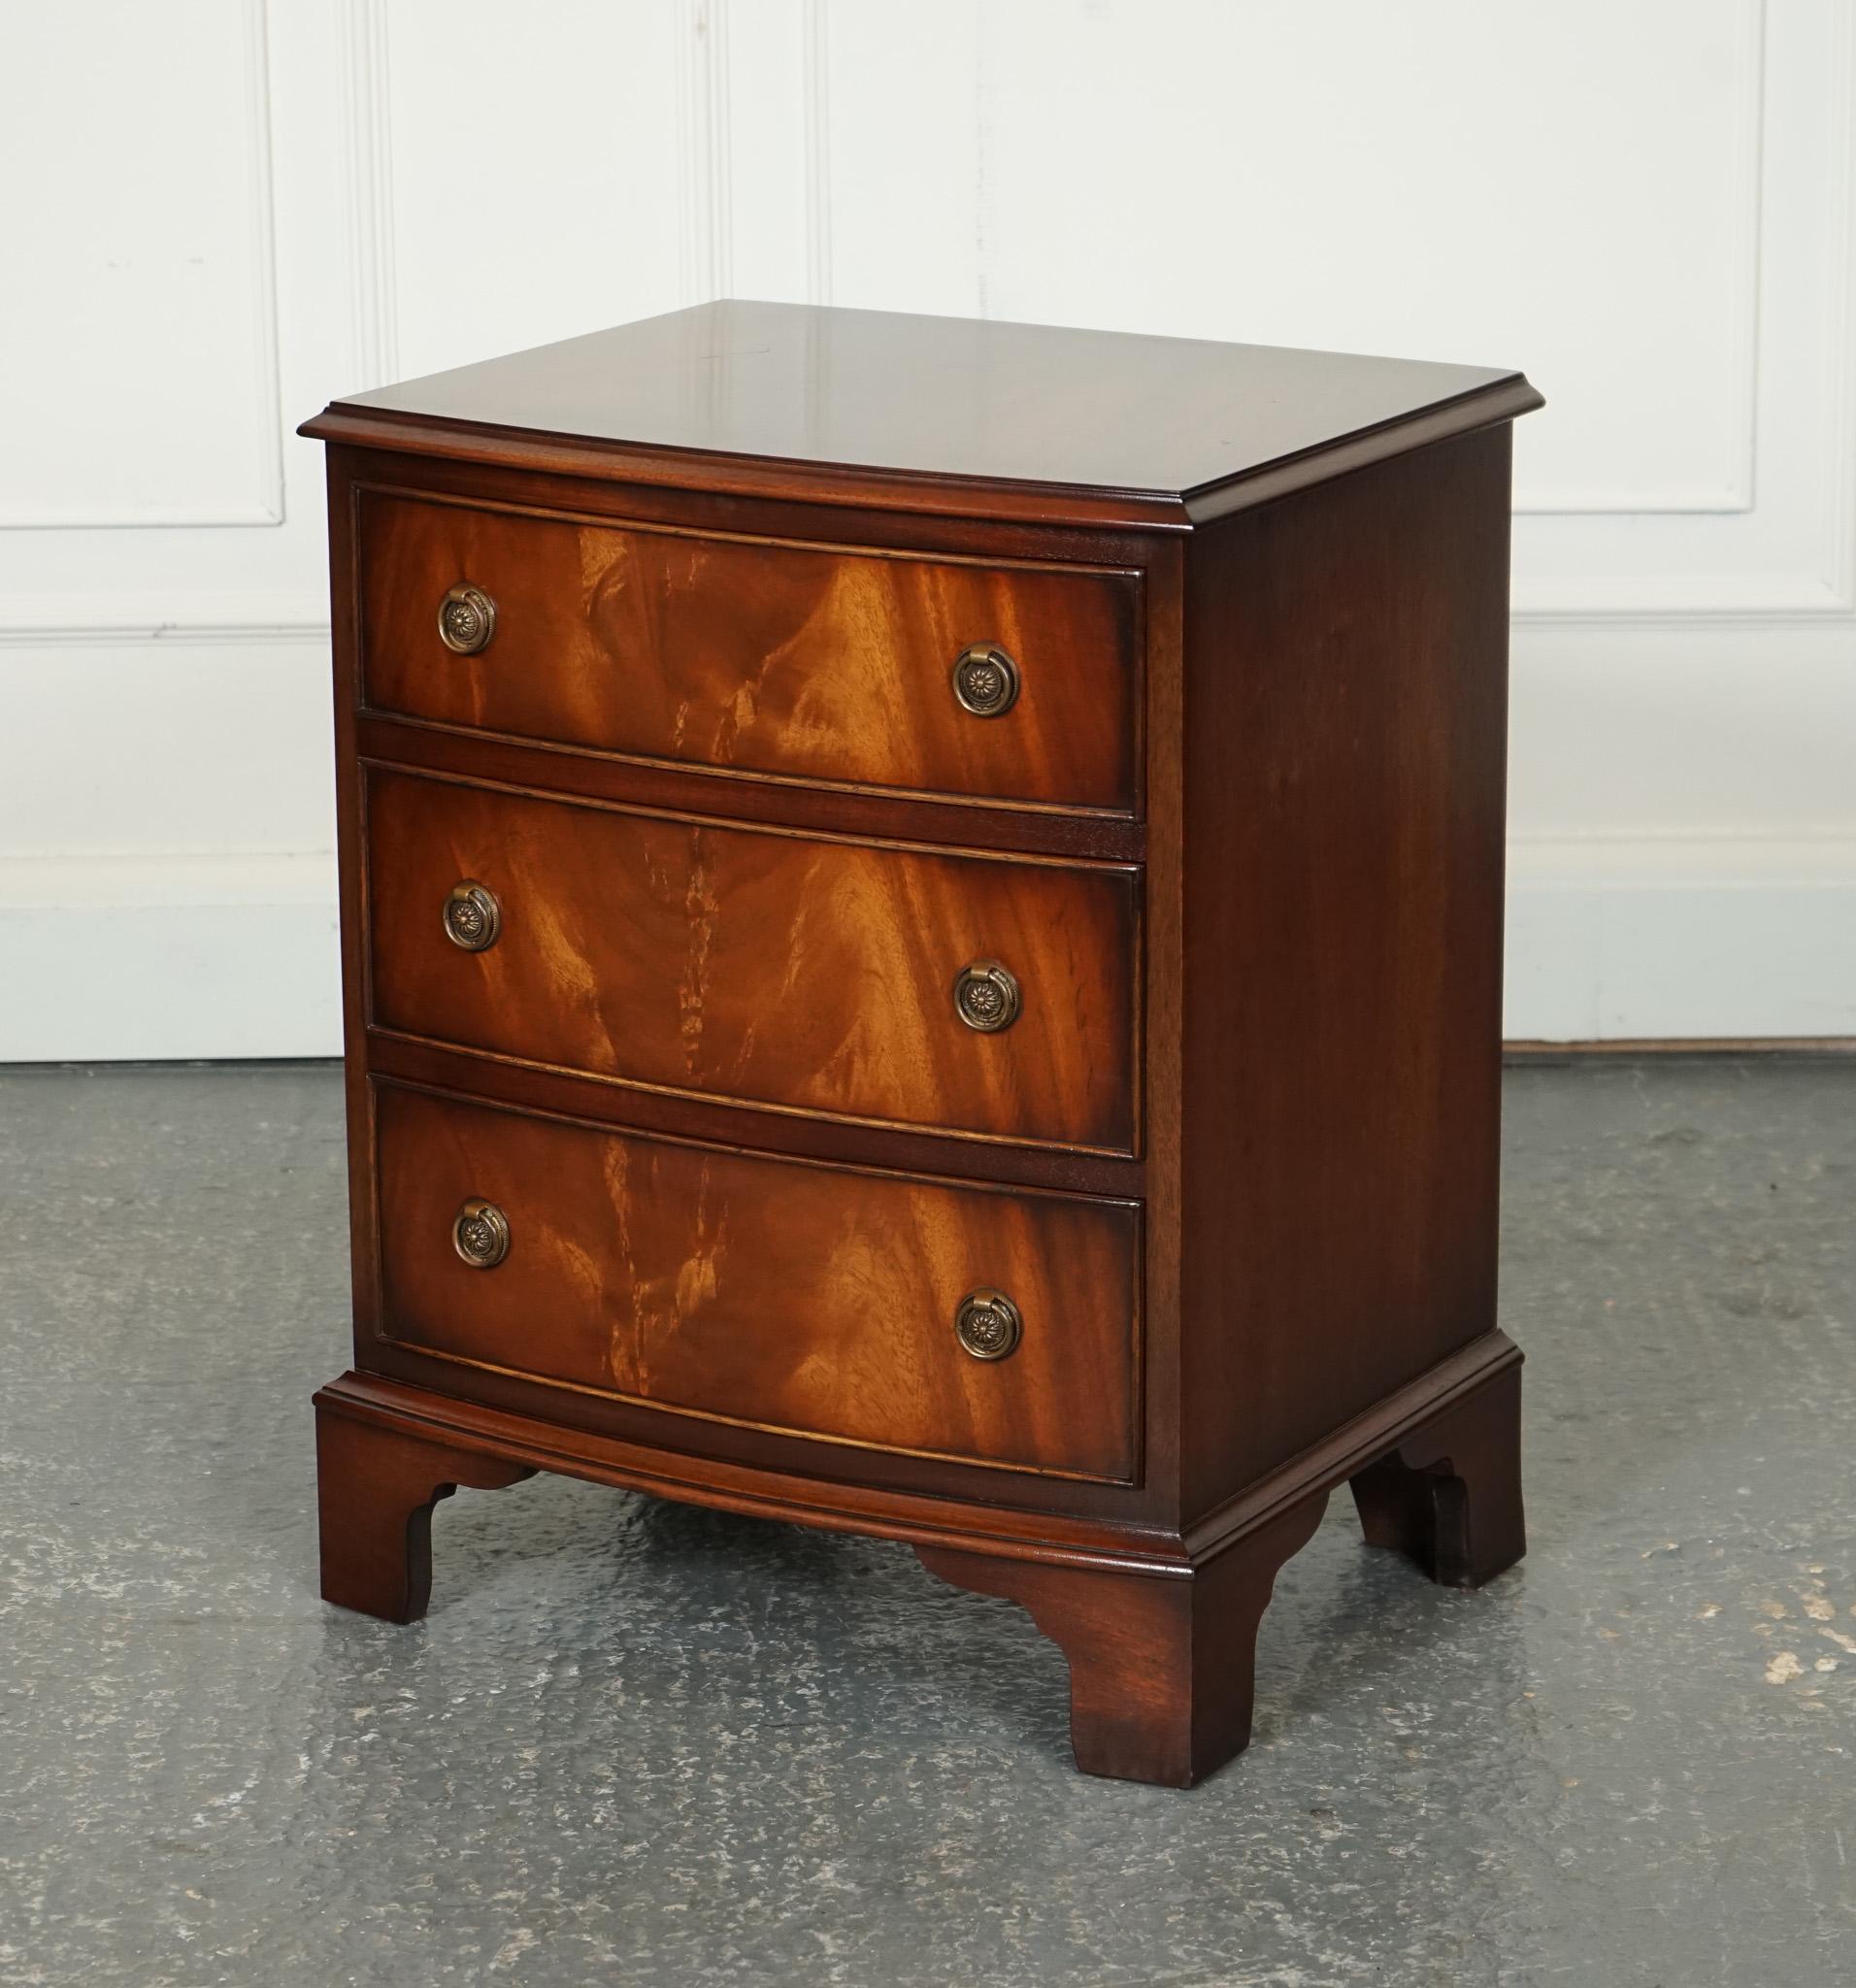 Georgian ViNTAGE GEORGIAN STYLE CHEST OF DRAWERS BEVAN FUNELL J1 For Sale